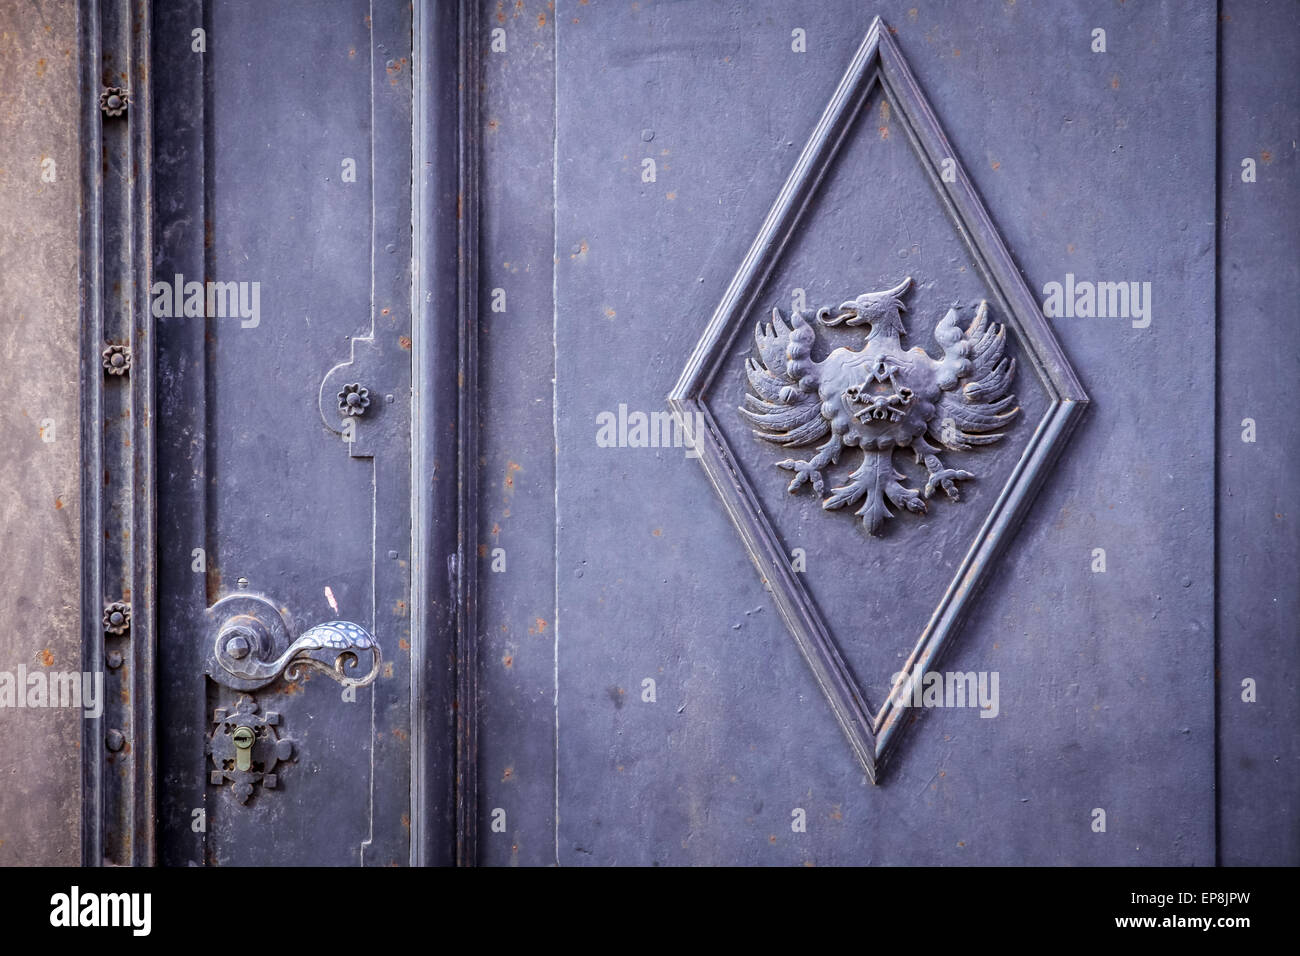 Massive old iron door with eagle and craftsmen icon Stock Photo